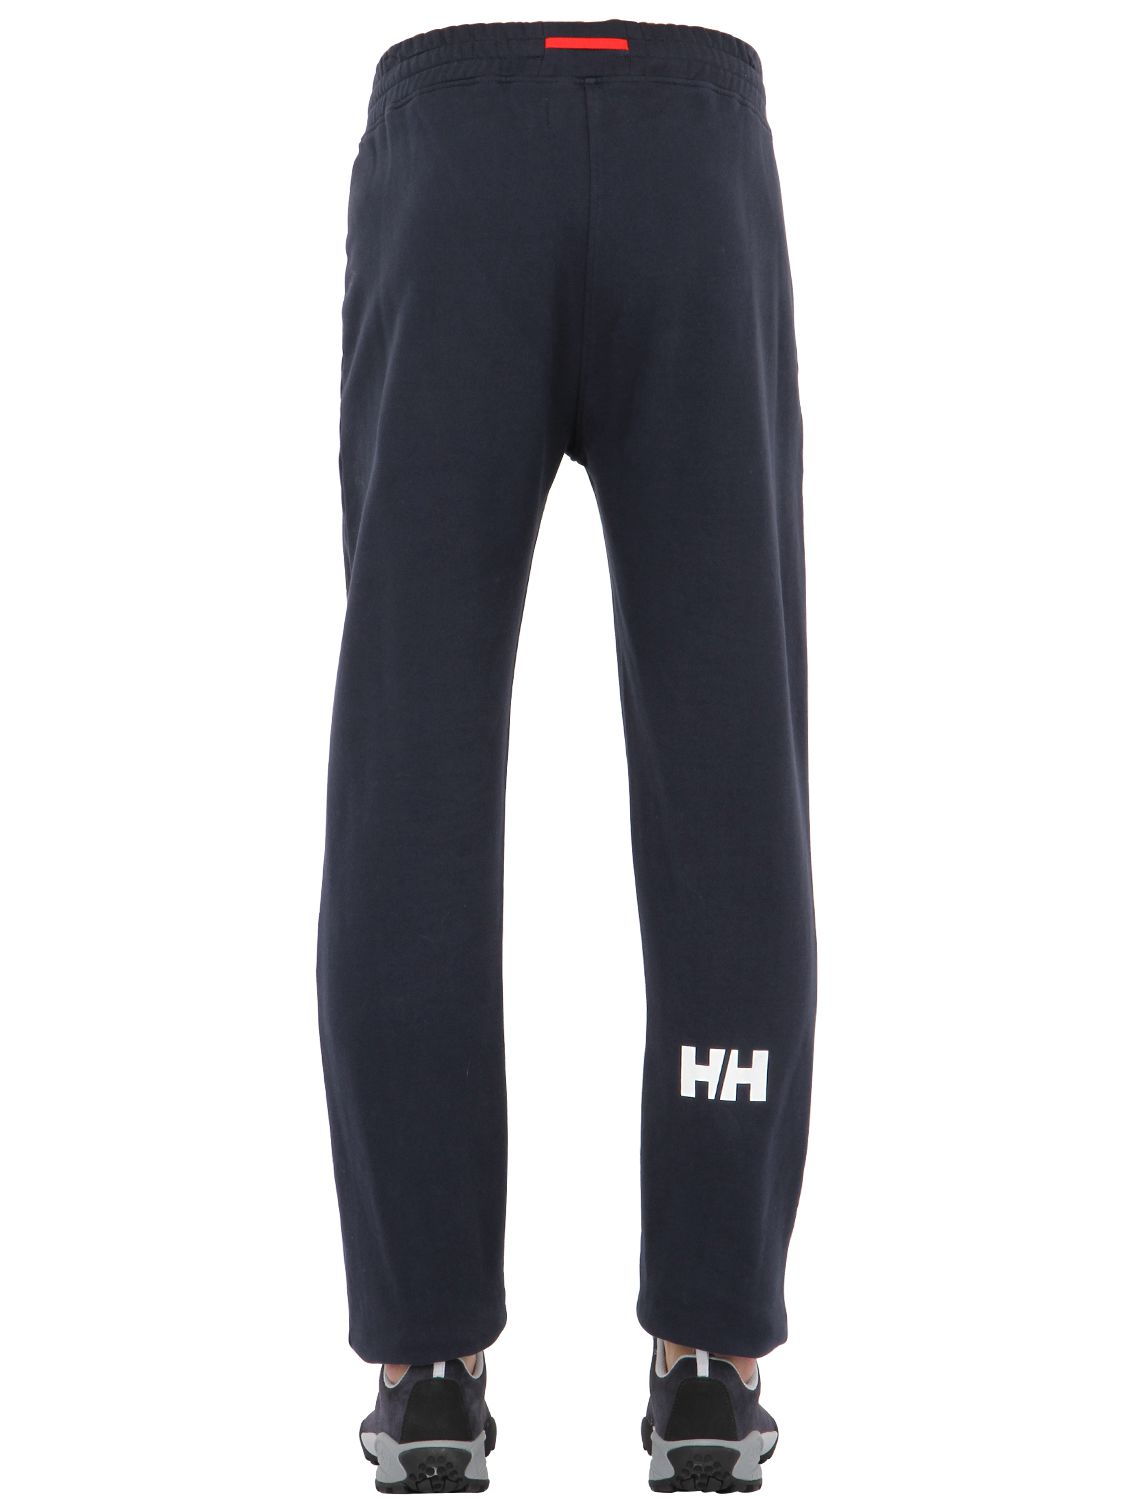 Helly Hansen Crew Cotton French Terry Jogging Pants in Navy (Blue) for Men  - Lyst